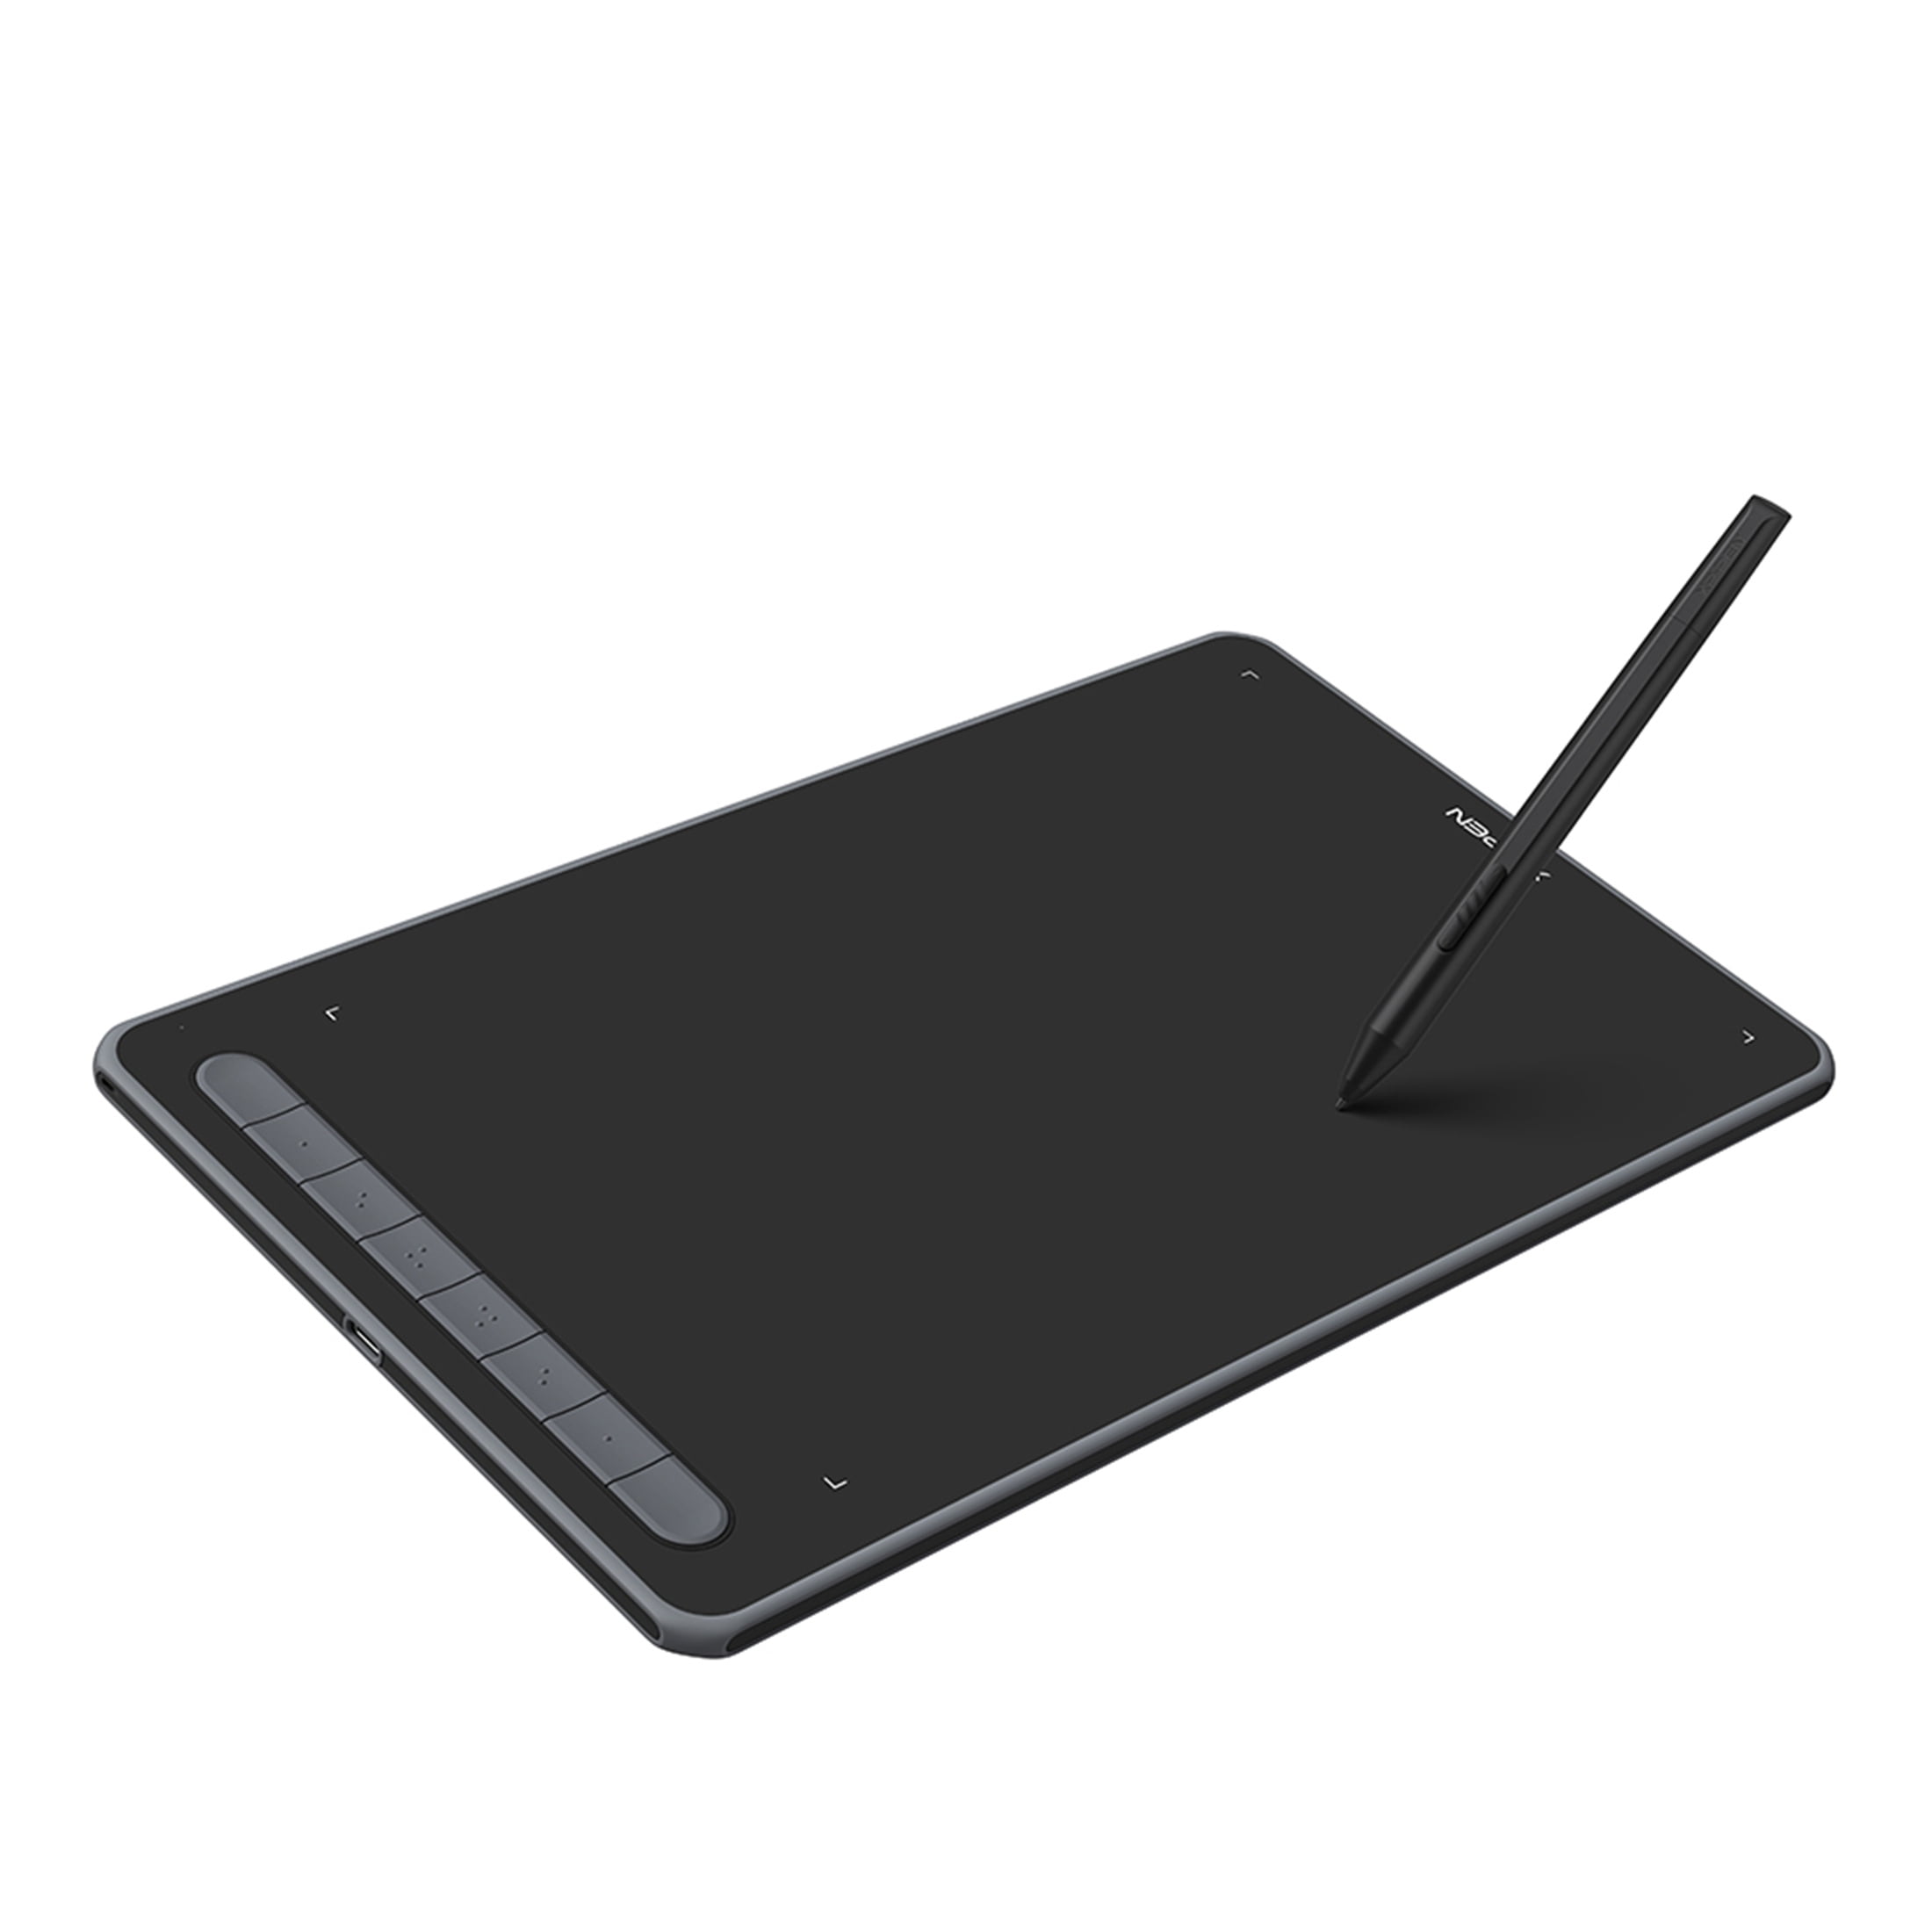 Pen tablets and displays for digital art: drawing like on paper